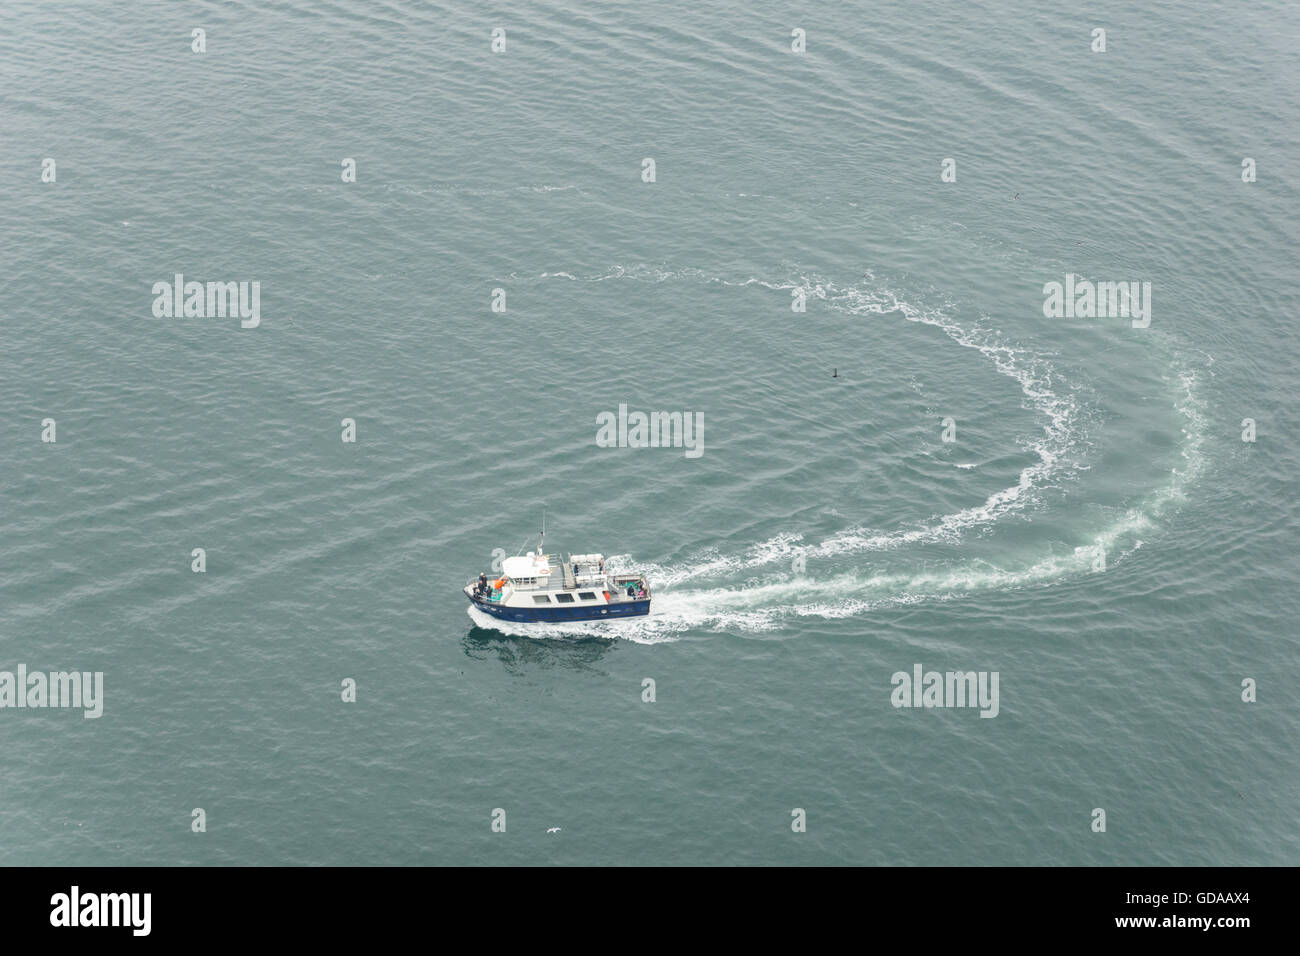 Ireland, County Clare, Cliffs of Moher, boat from above Stock Photo